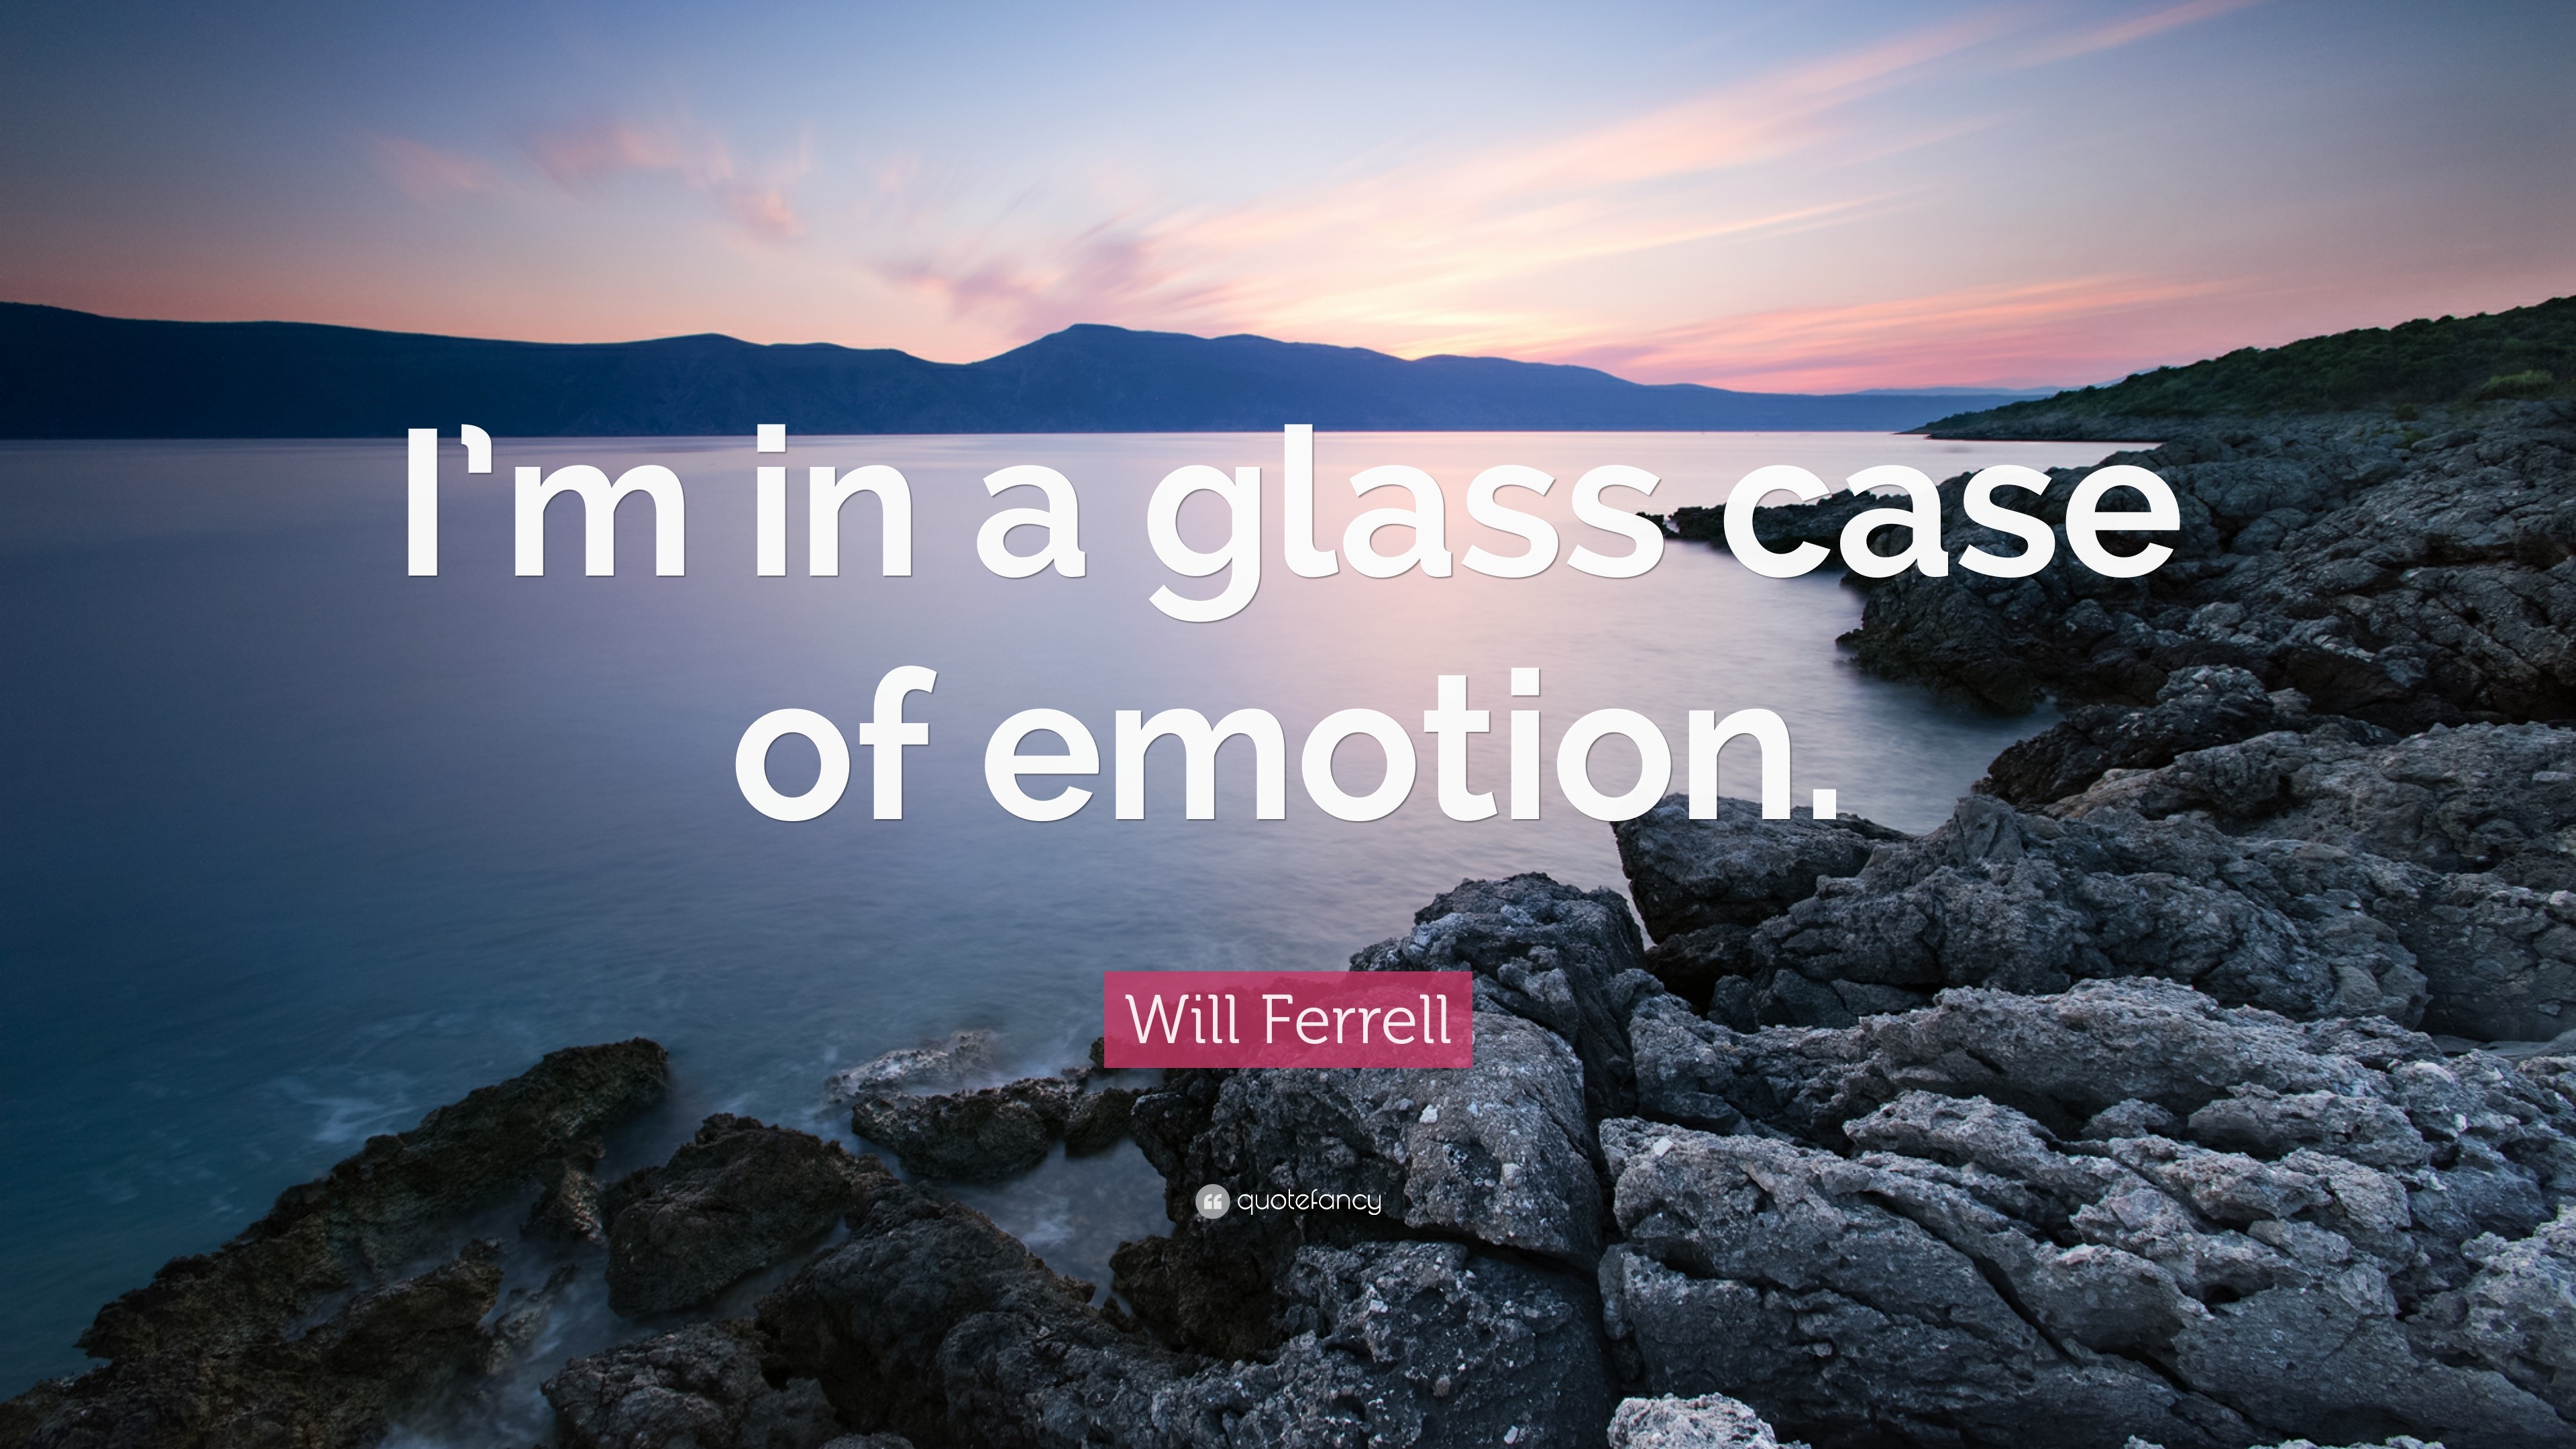 Will Ferrell Quote “i’m In A Glass Case Of Emotion ”